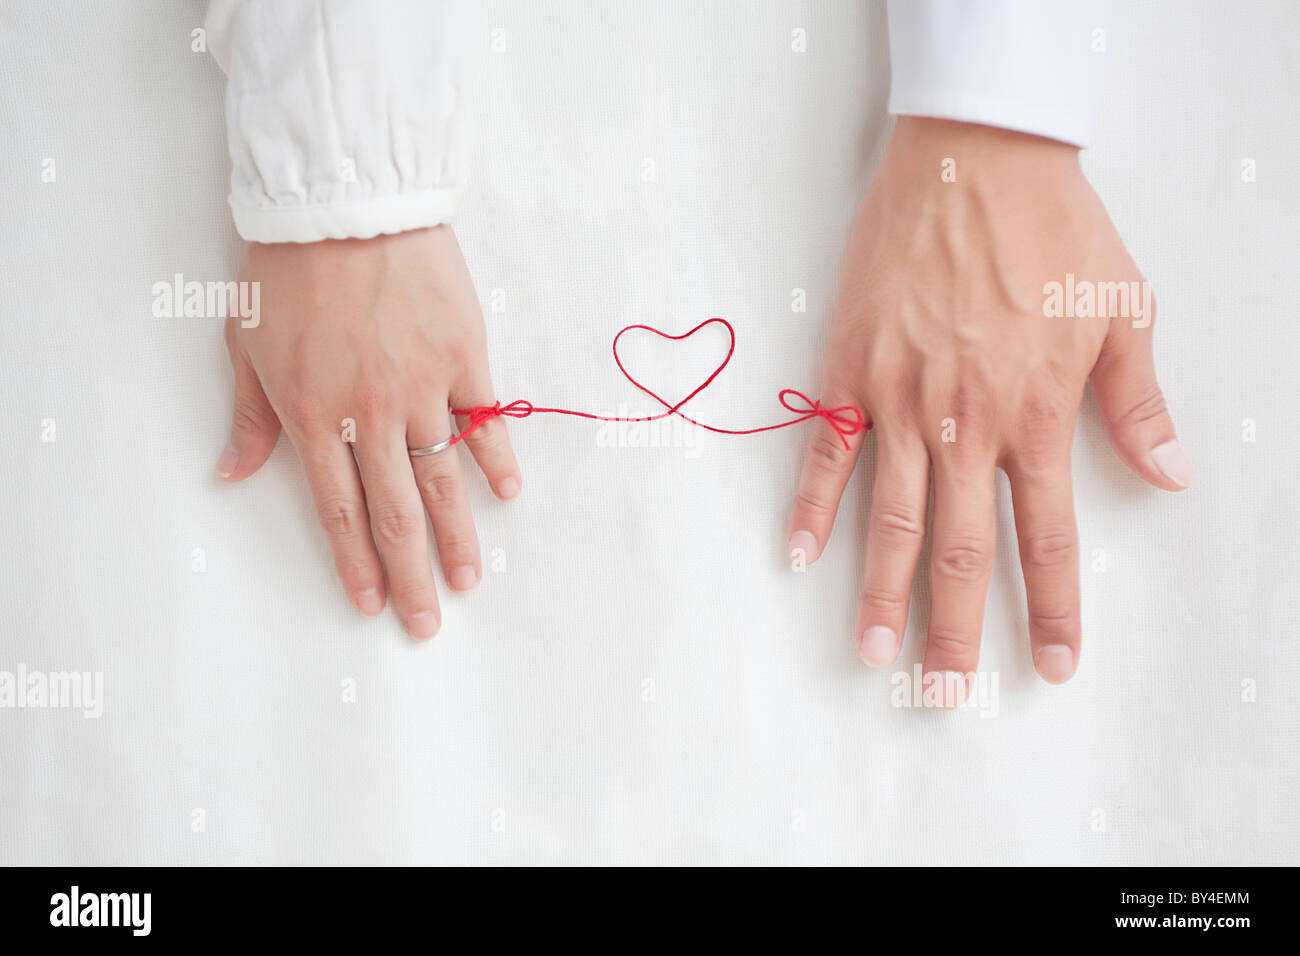 String on woman and man's pinkies tying them together Stock Photo